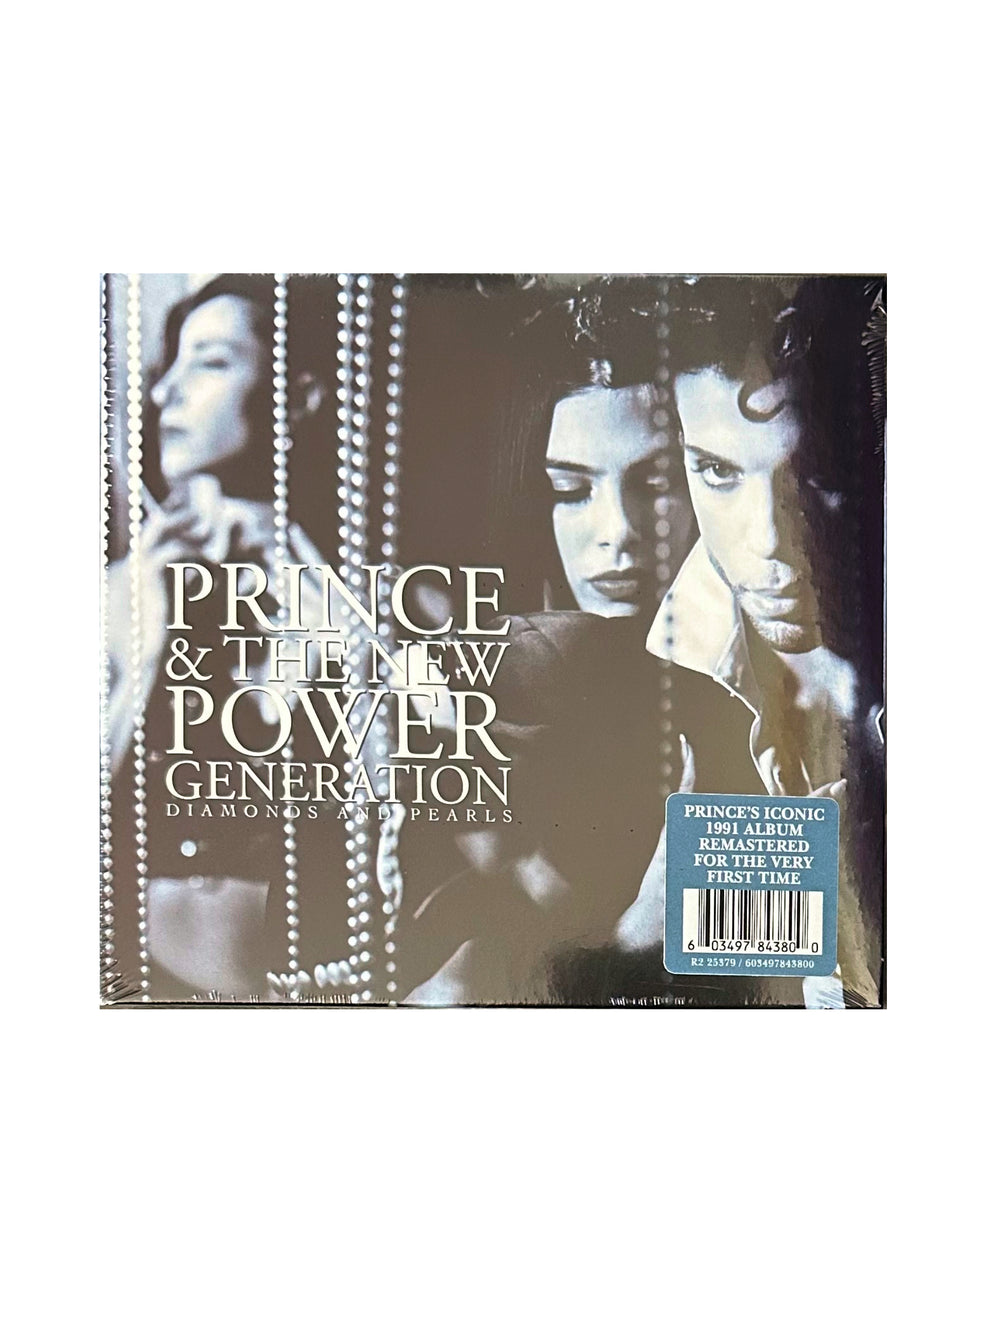 Prince – & The New Power Generation – Diamonds And Pearls Reissue RM 1 CD NEW 2023